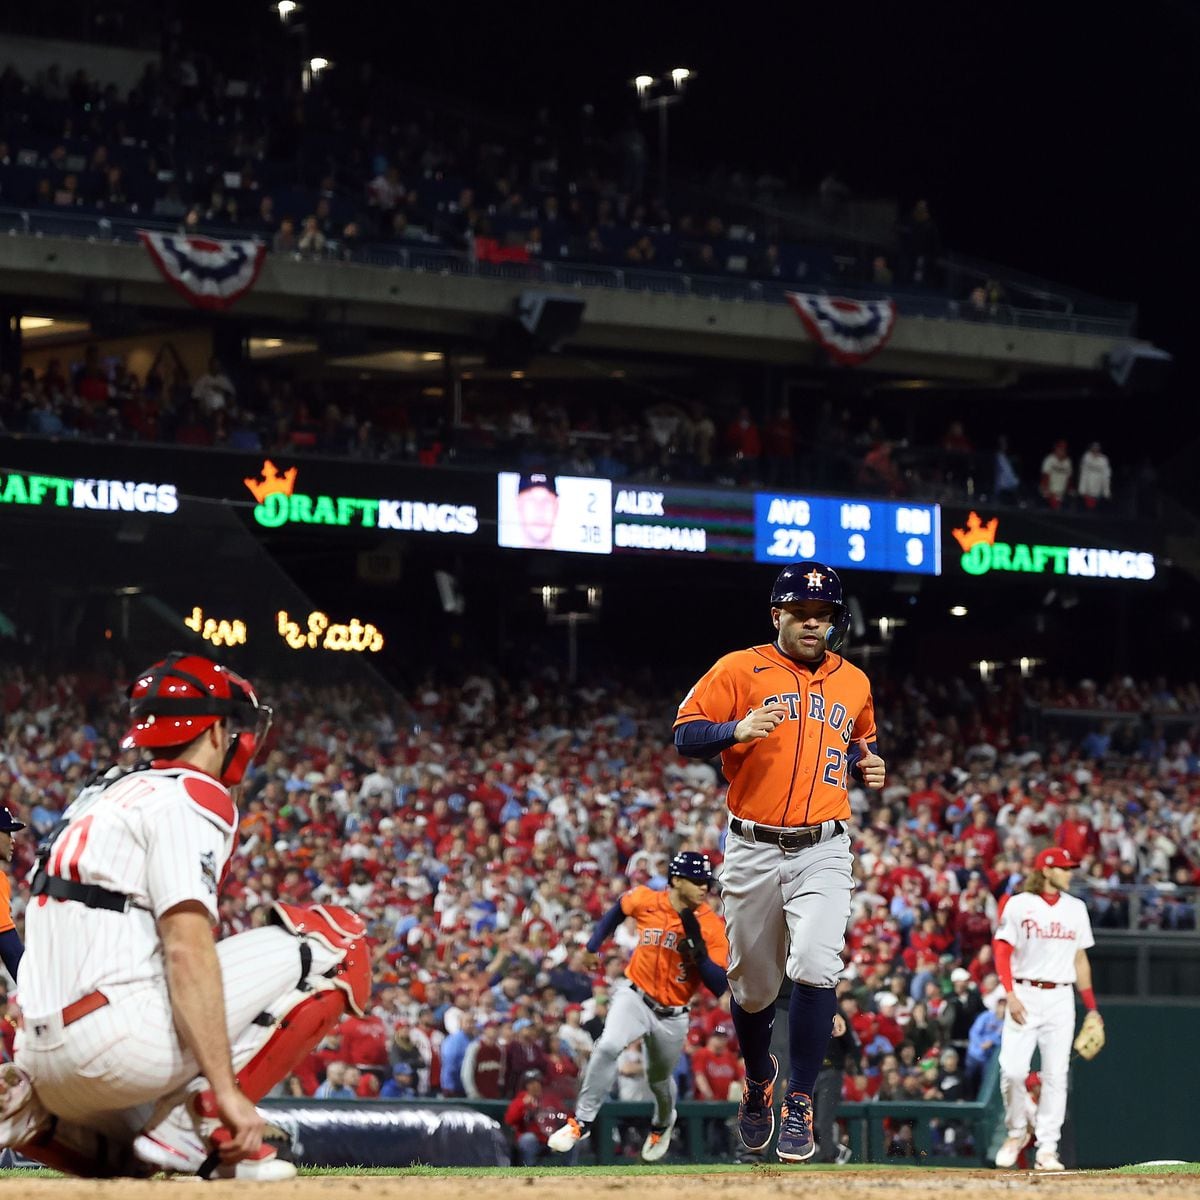 2022 World Series Game 1 Phillies vs Astros summary: score, stats and  updates - AS USA